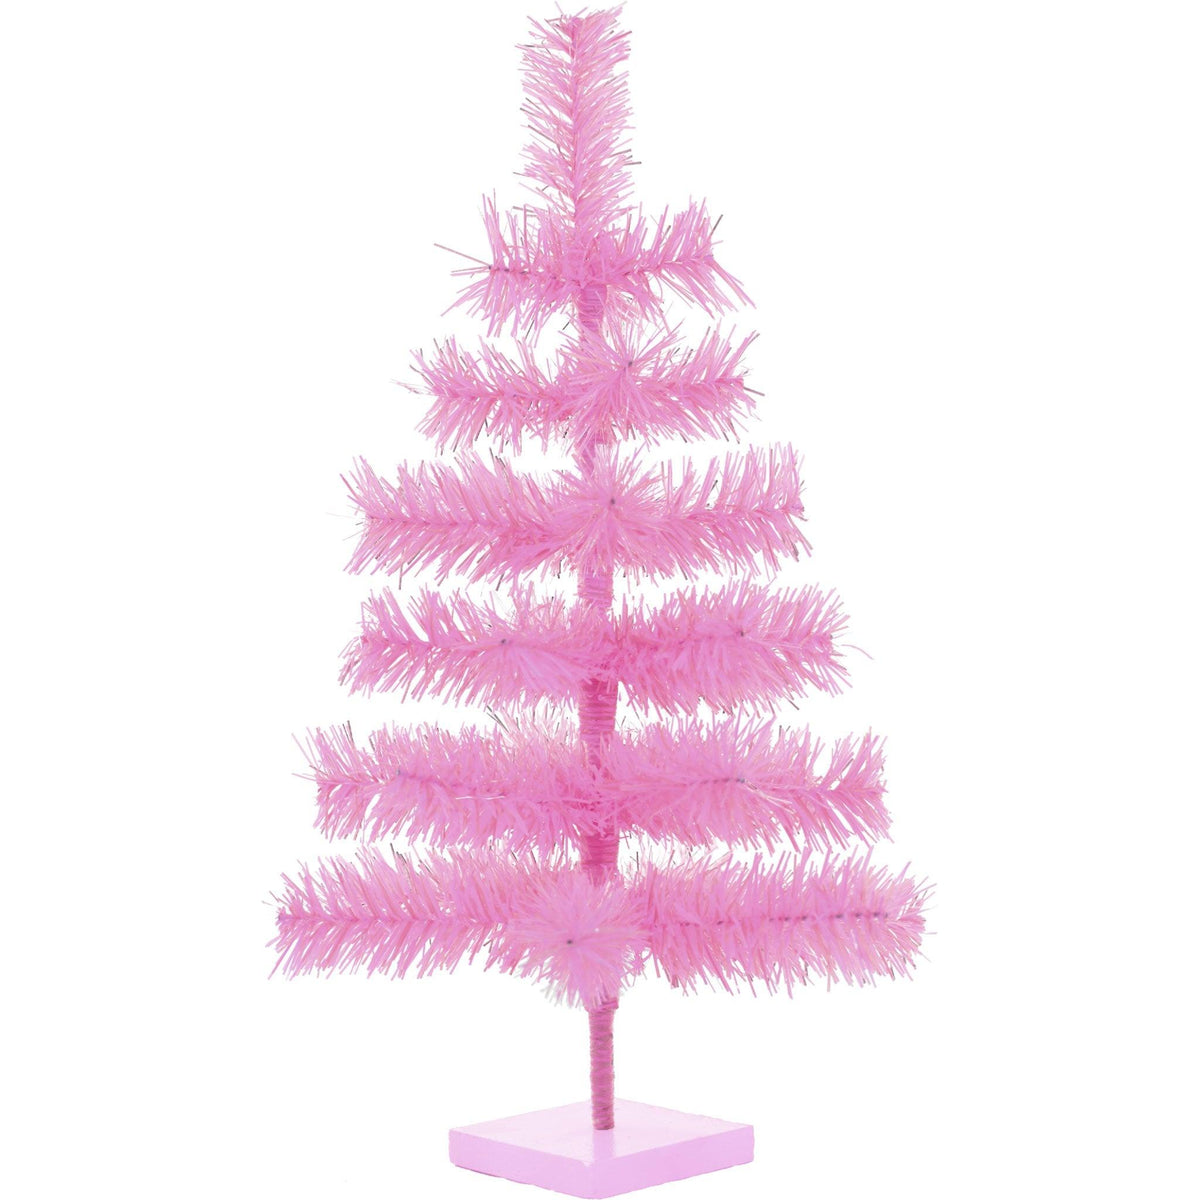 Lee Display's Original Pink Tinsel Christmas Trees! Decorate for the holidays with retro-style Barbie Pink Christmas Trees. Incorporate a little pink into your holiday decorations this year